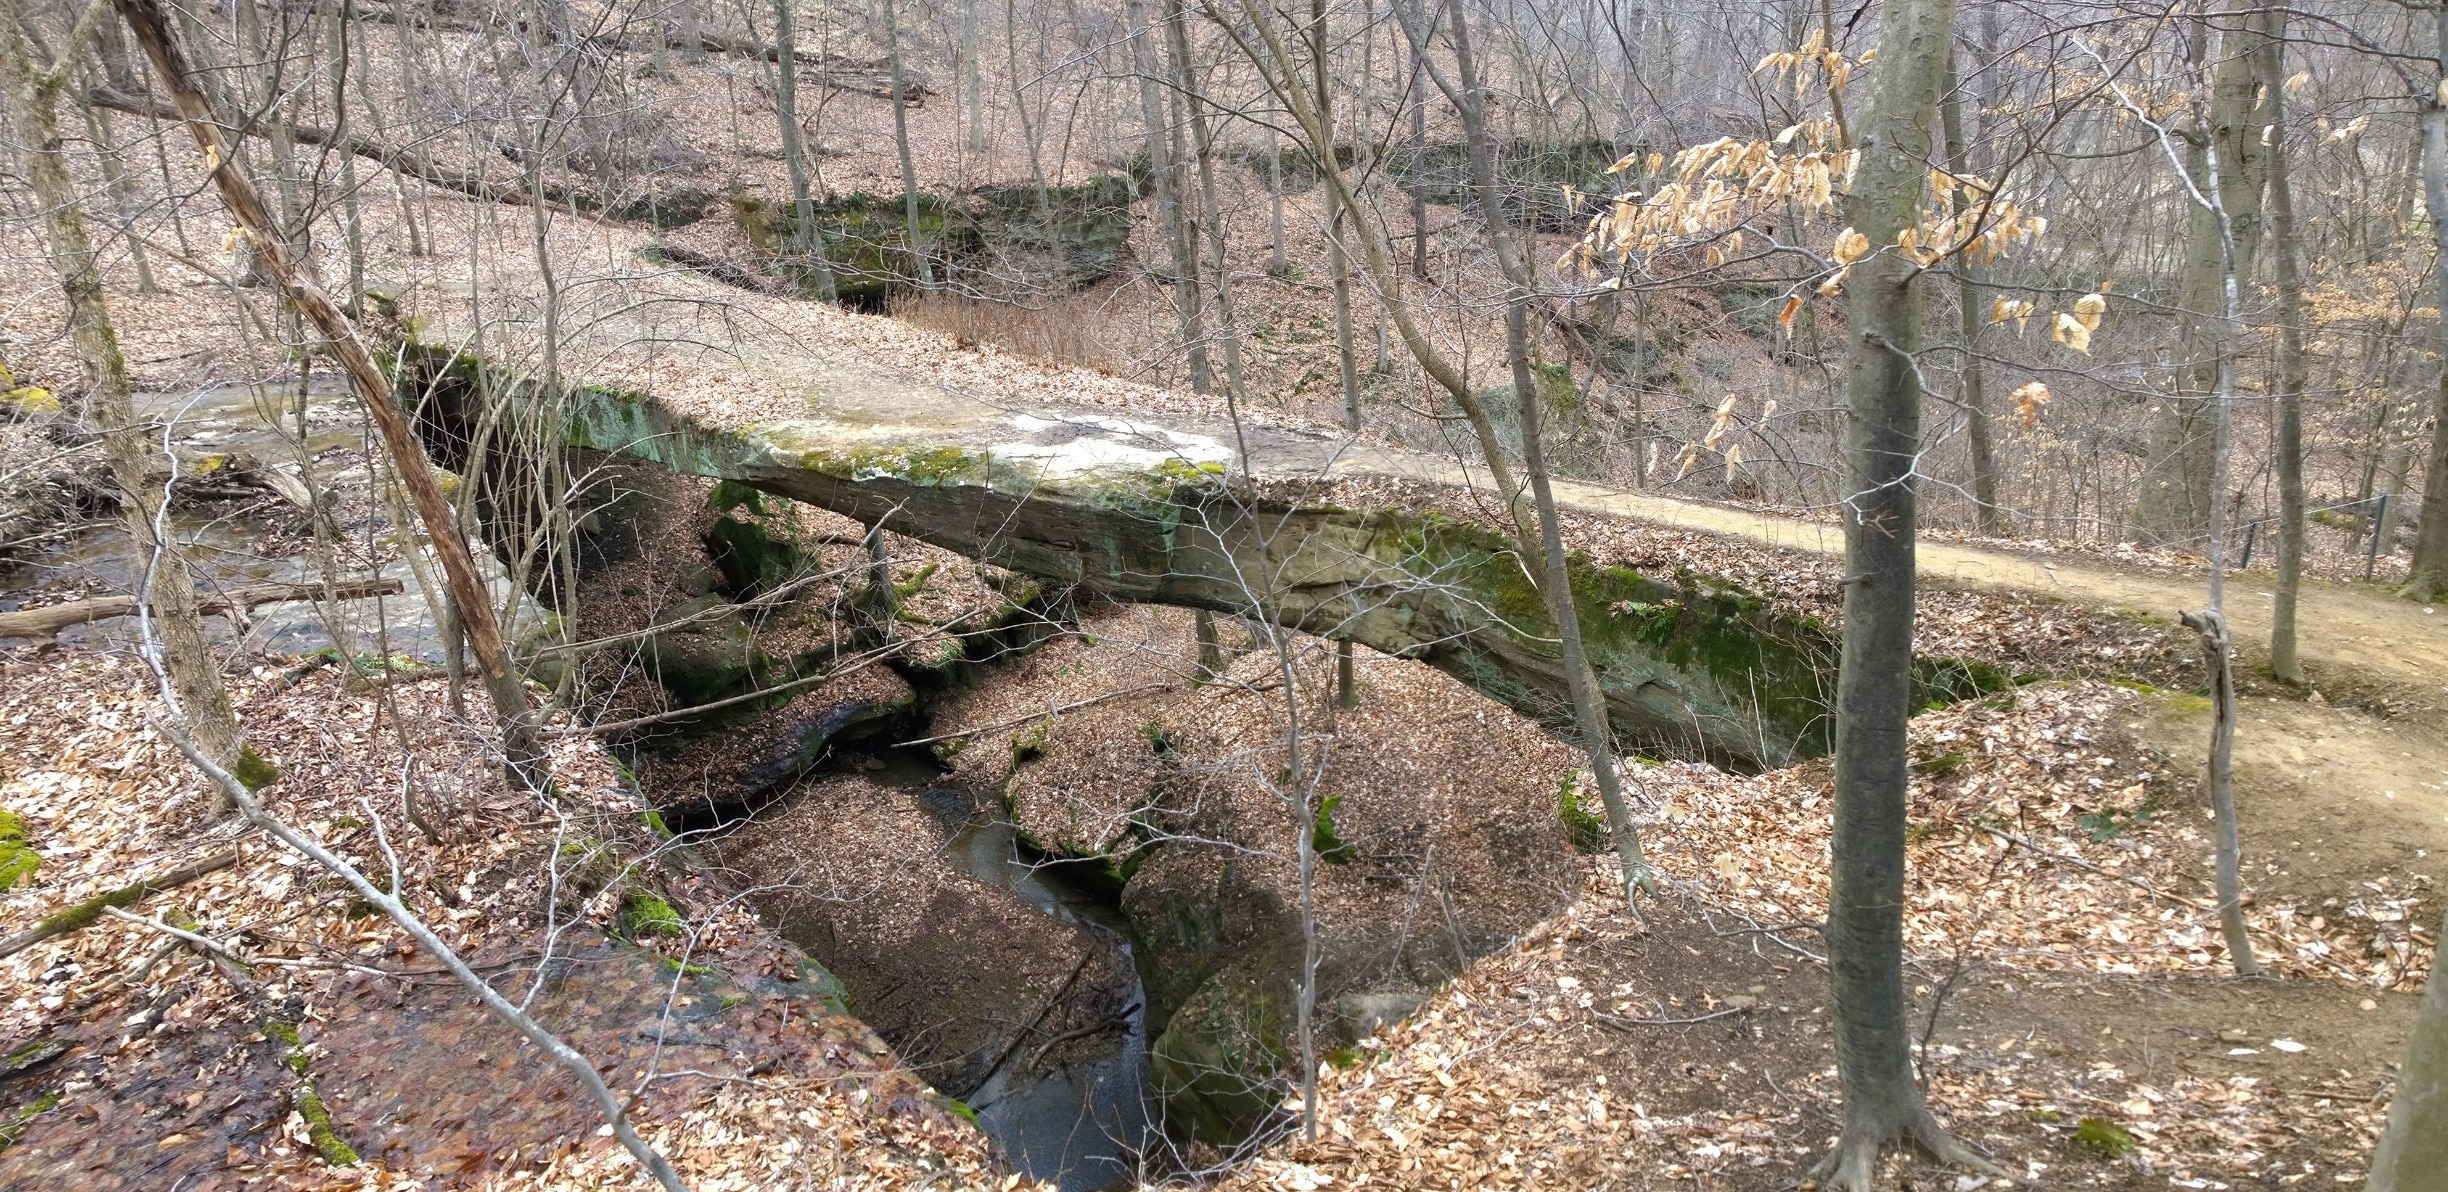 Rockbridge's natural arch or bridge is more than 100 feet long and 10 to 20 feet wide, and gracefully arches 50 feet across a ravine. It is considered the largest of the twelve natural bridges in Ohio.